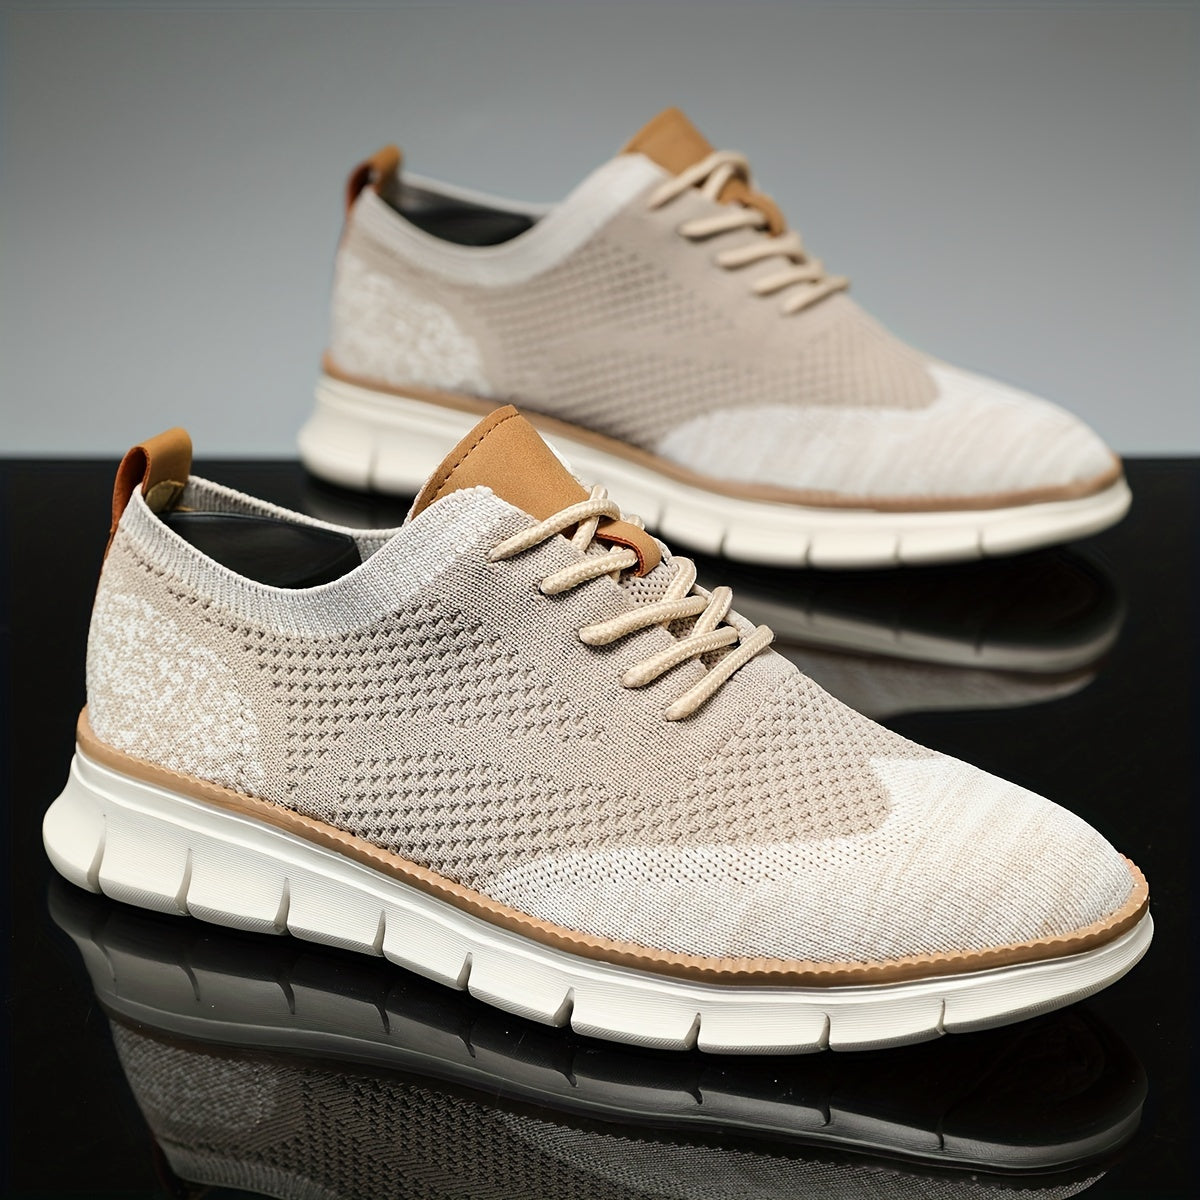 Men's Woven Knit Breathable Sneakers, Casual Lace Up